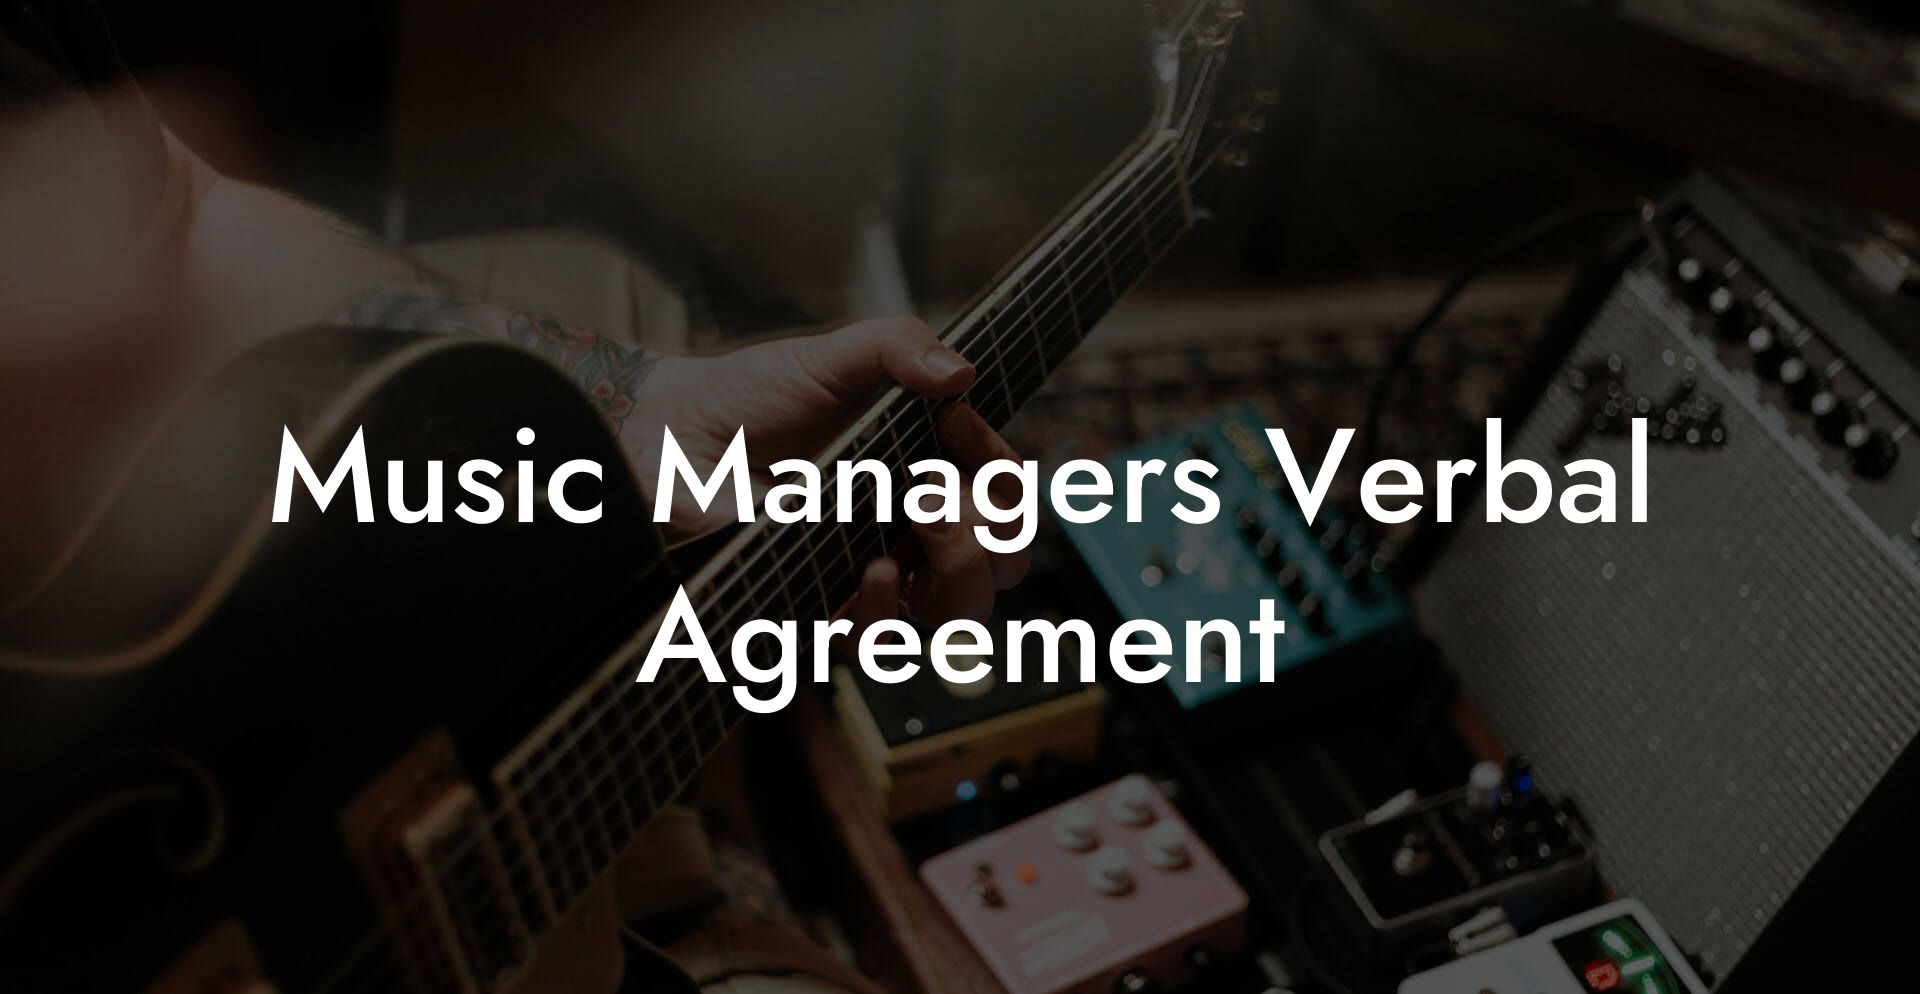 Music Managers Verbal Agreement